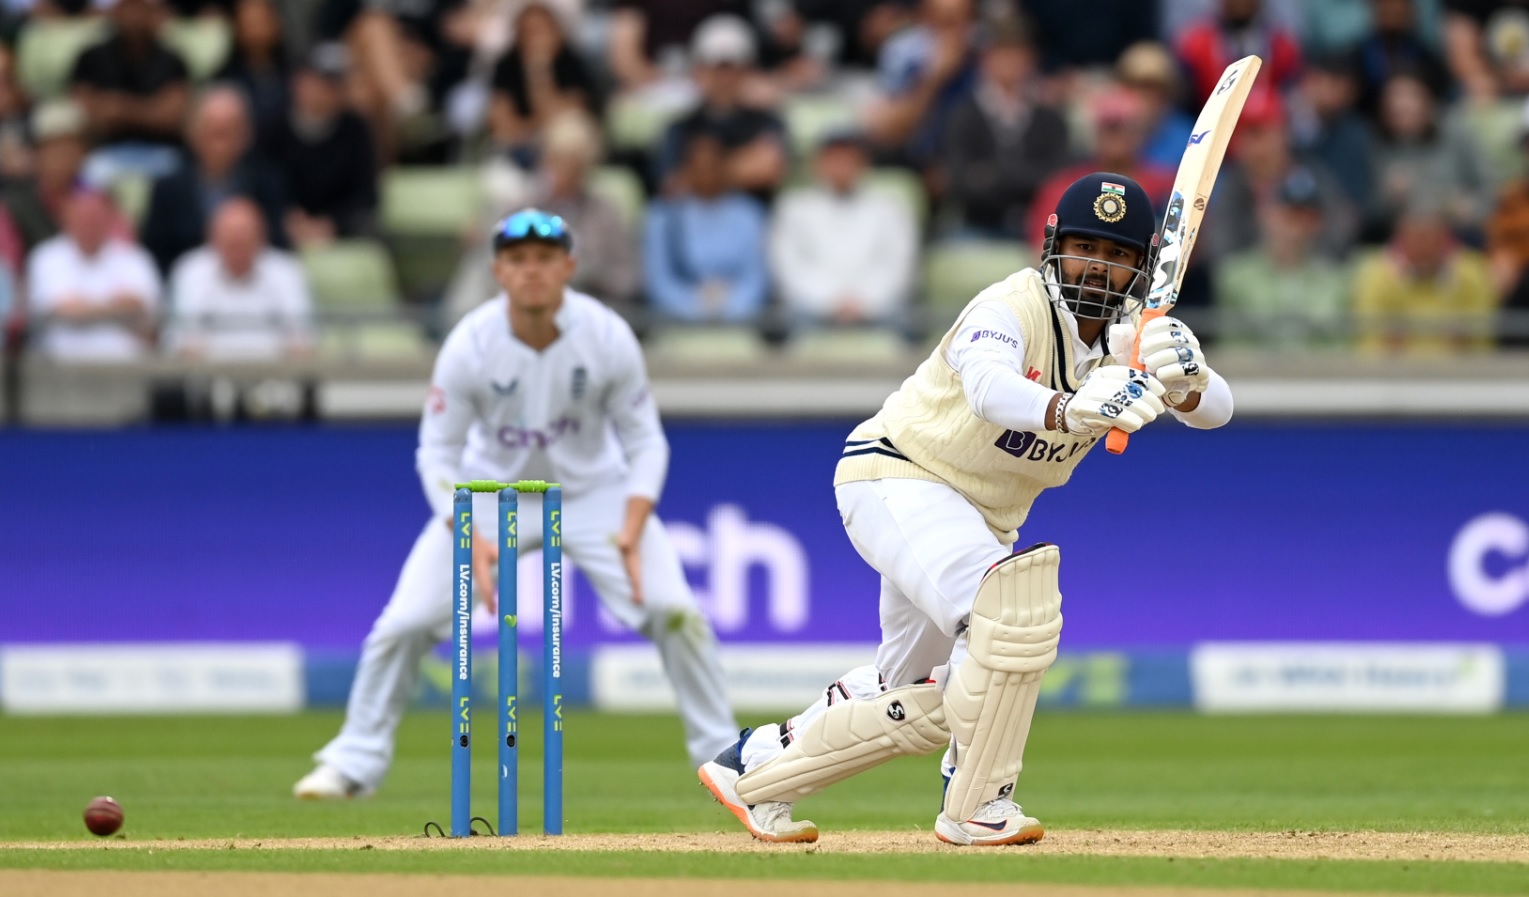 Rishabh Pant’s remarkable comeback in form at Edgbaston now seeks consistency in limited-overs cricket